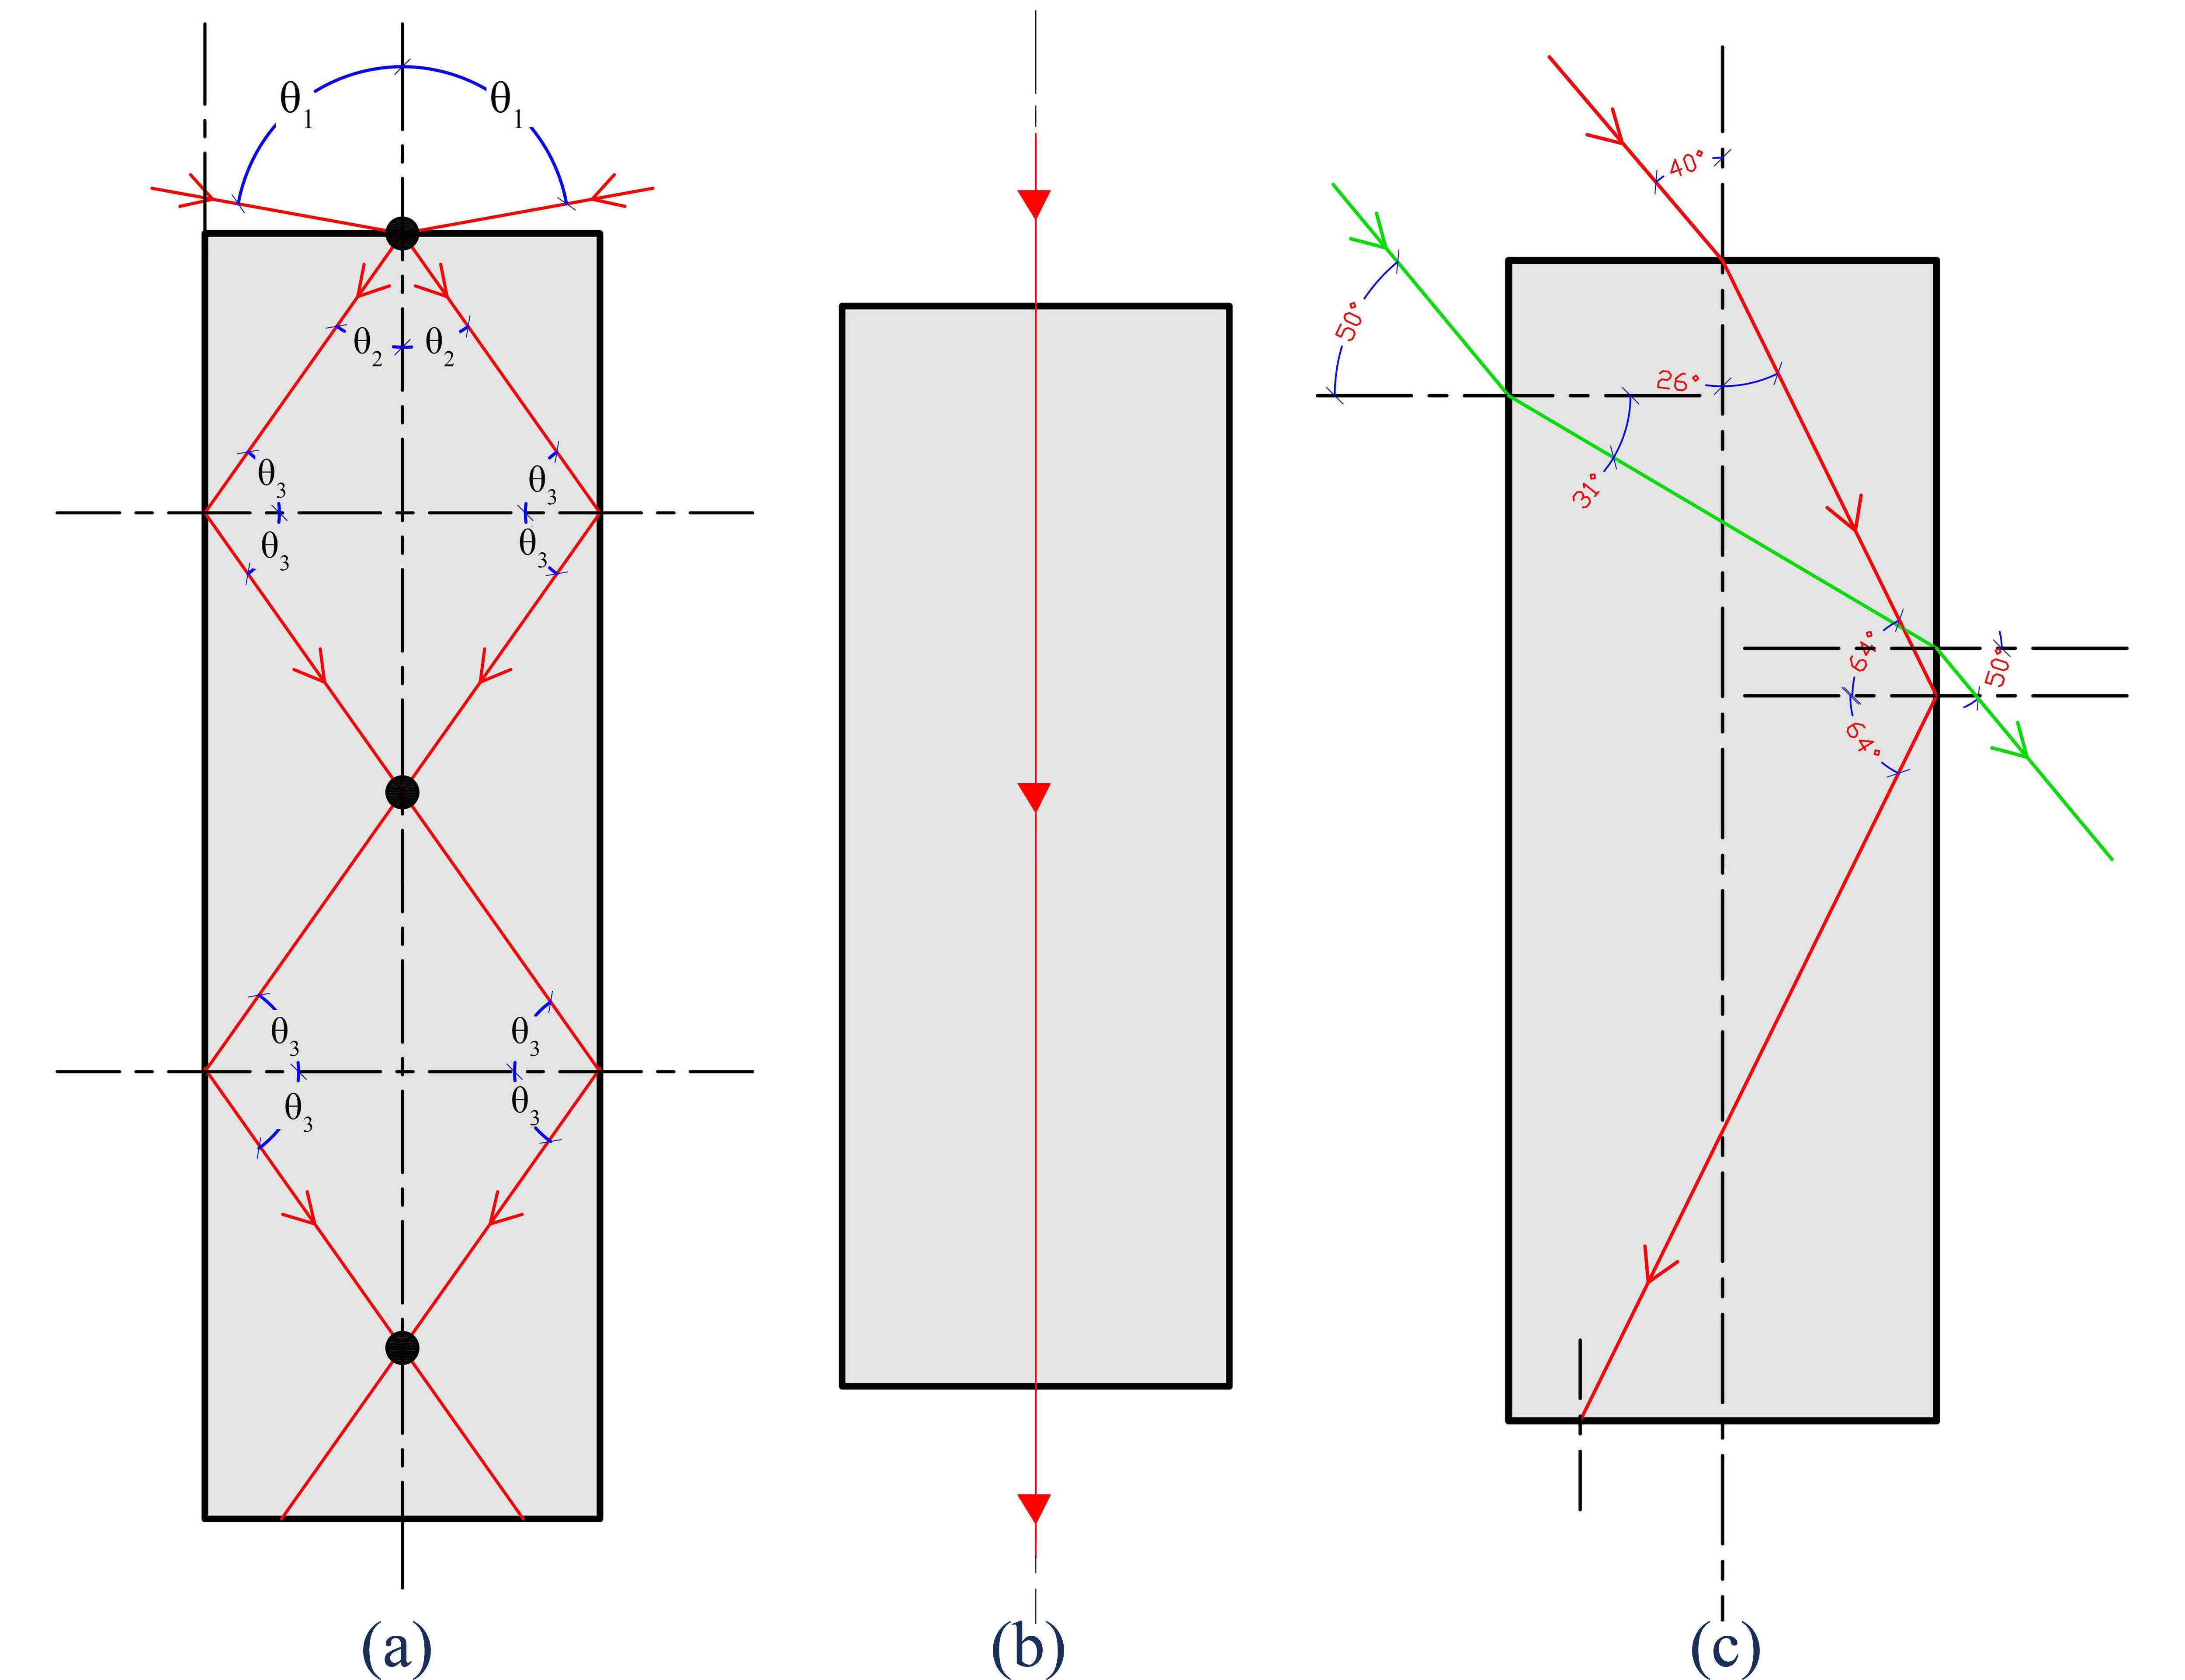 Geometrical analysis for the light ray that enters the acrylic glass panel: (a) light rays intersect along the central axis, (b) angle 90º, and (c) angle 50º.